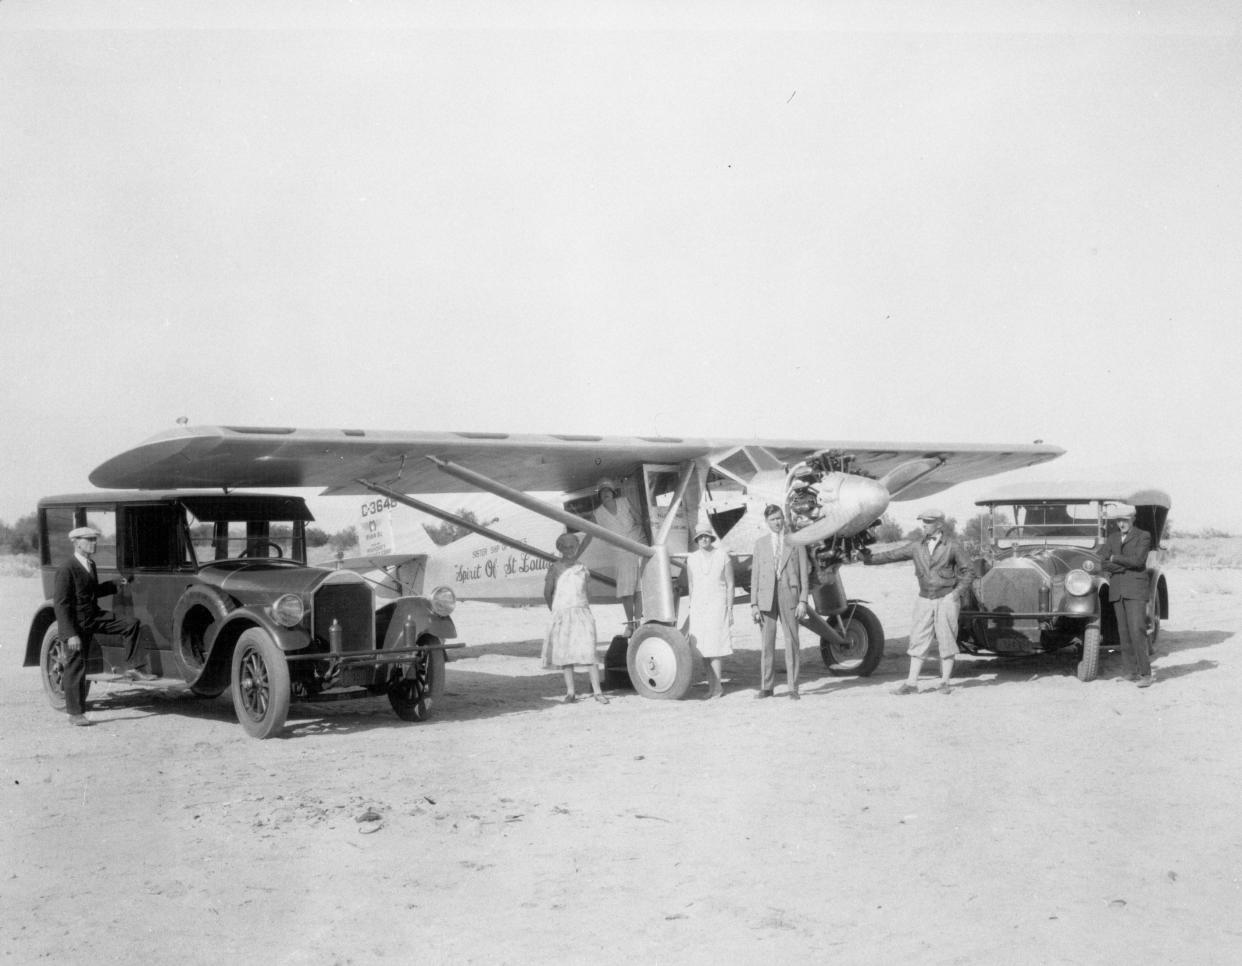 In 1928, the first plane to land on the air strip on Section 14 in Palm Springs was the sister ship of the Spirit of St. Louis.